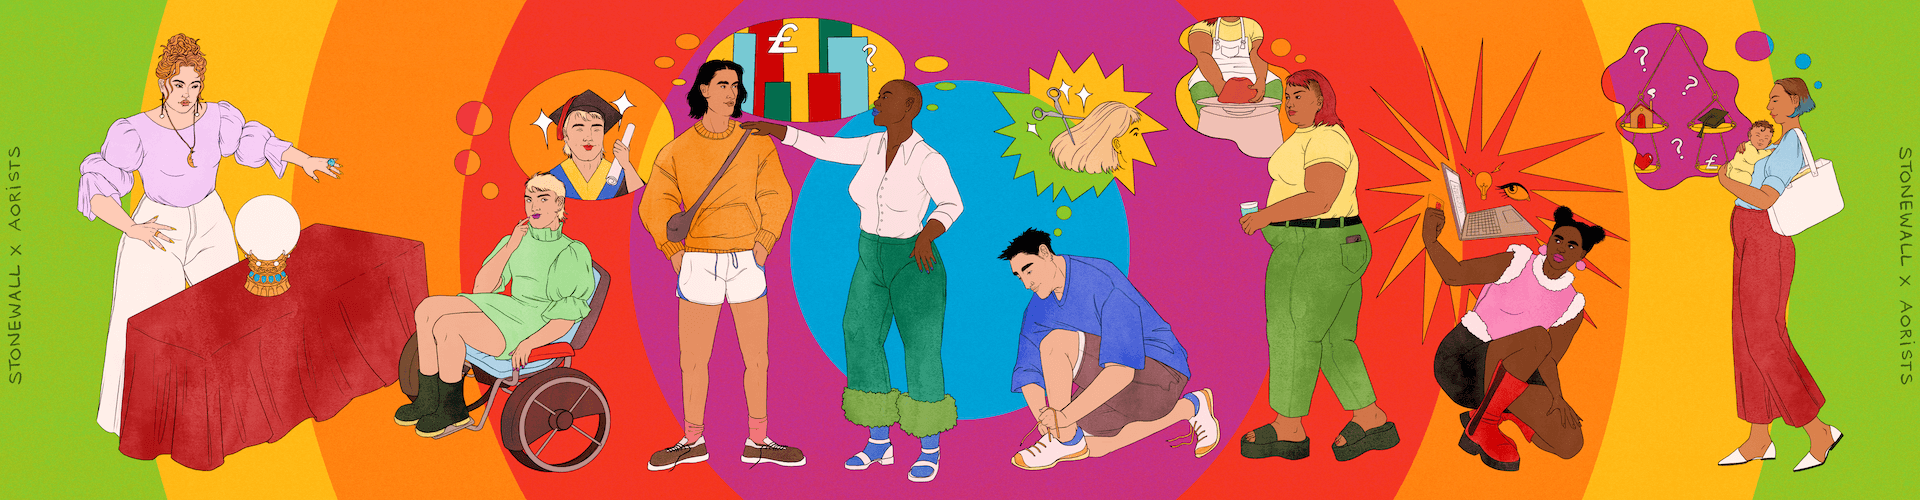 An illustration of LGBTQ+ young people queueing up to have their futures told. All of them have thought bubbles with different ideas for their future in education, training or work.